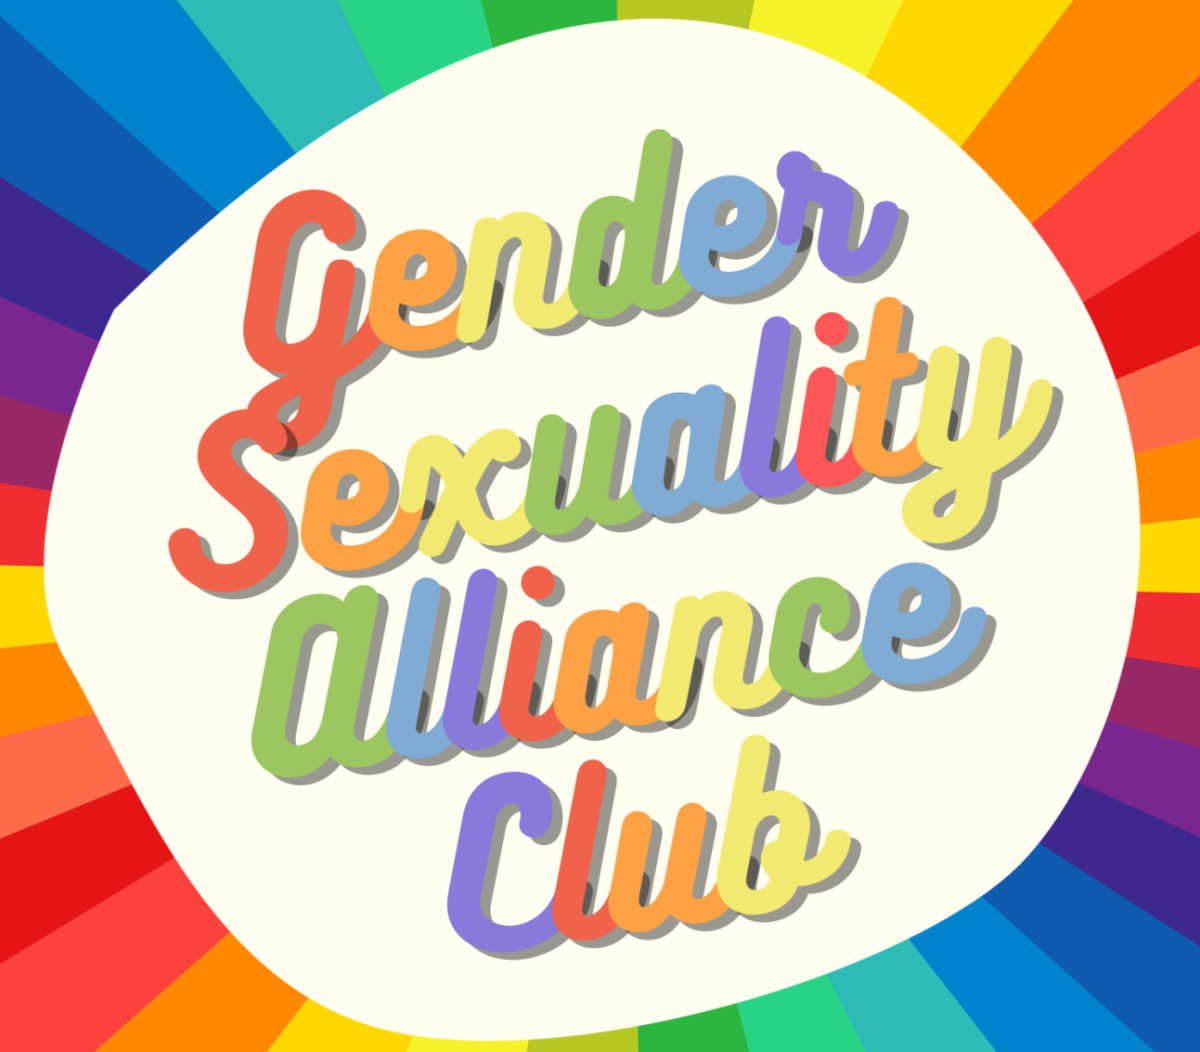 Gender Sexuality Alliance Club!